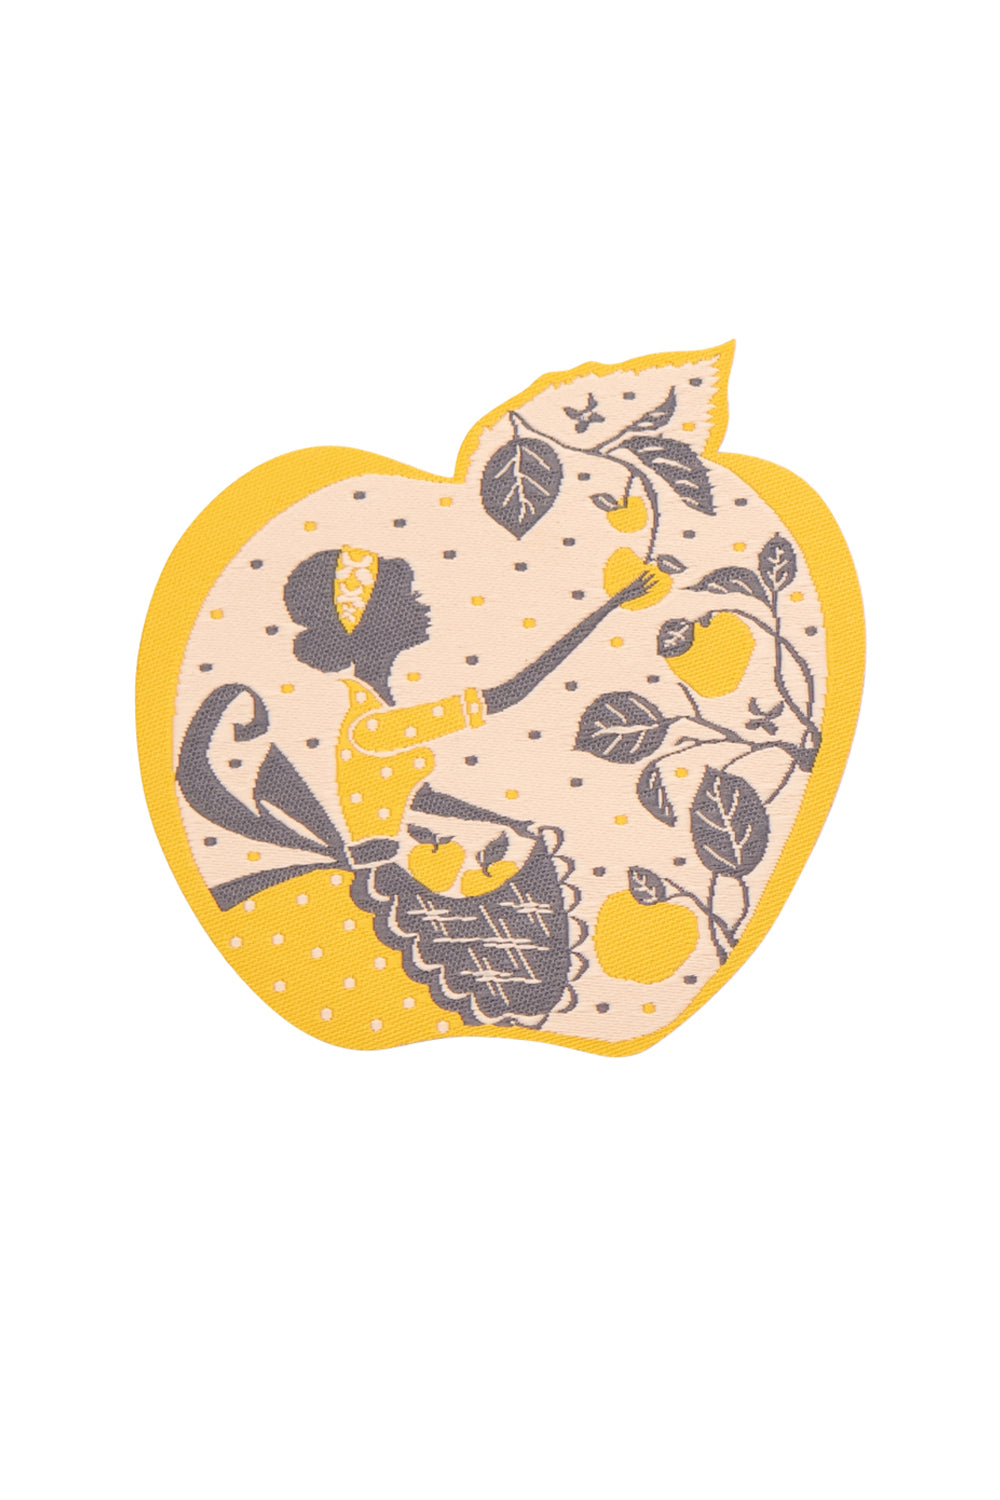 Grey and yellow apple-shaped iron on patch with a girl picking apples